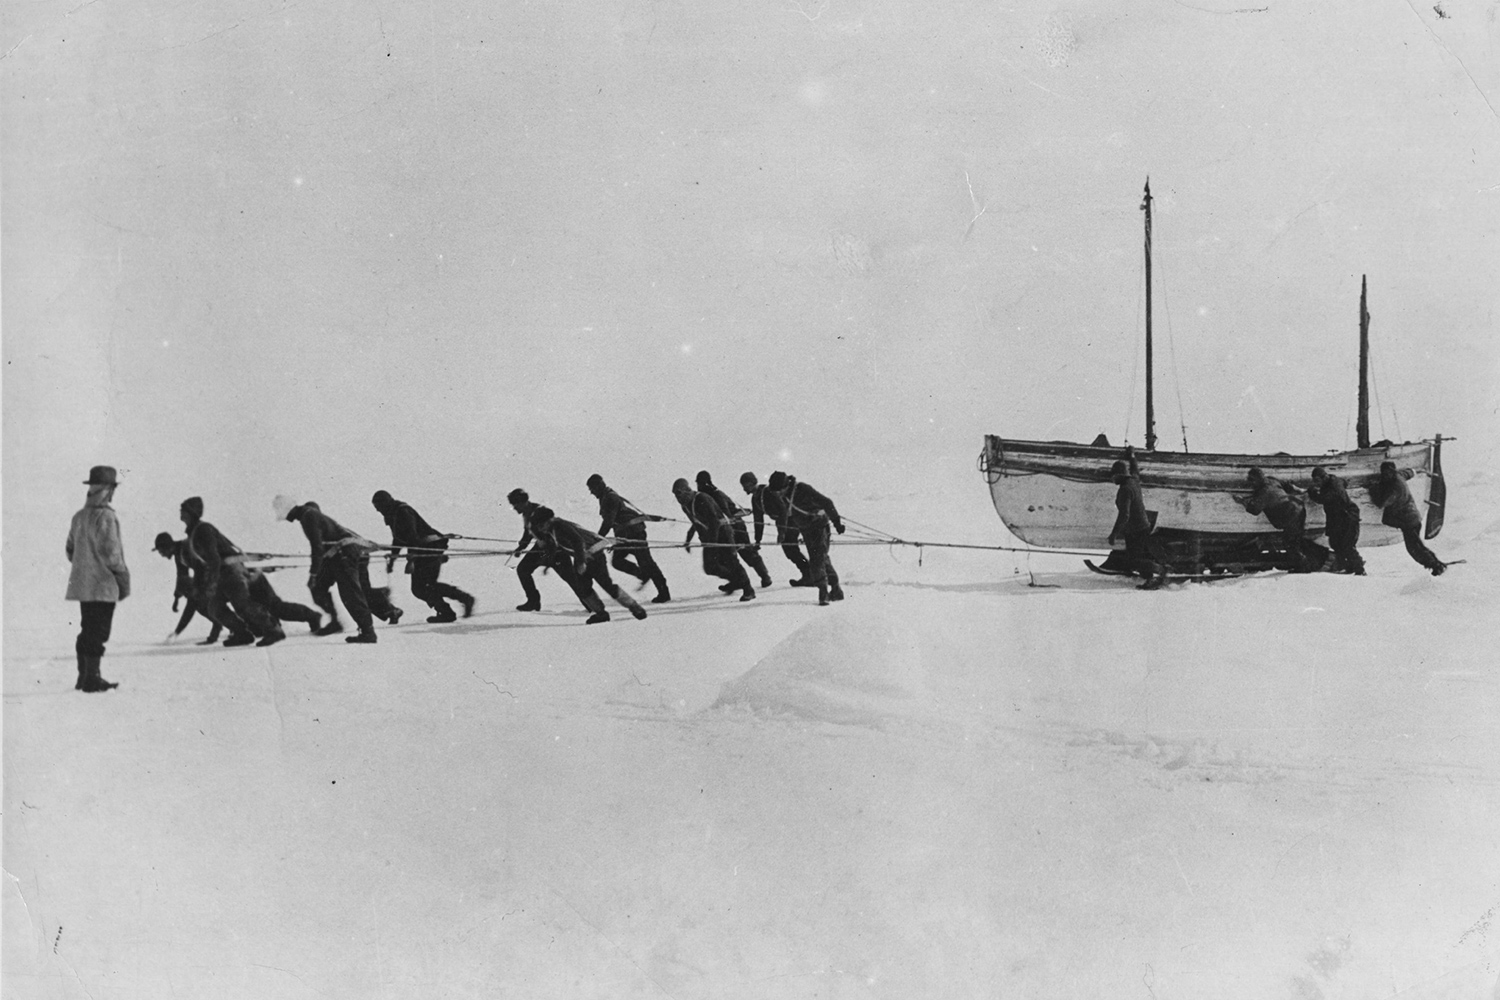 sailors from Endurance haul lifeboat over frozen water